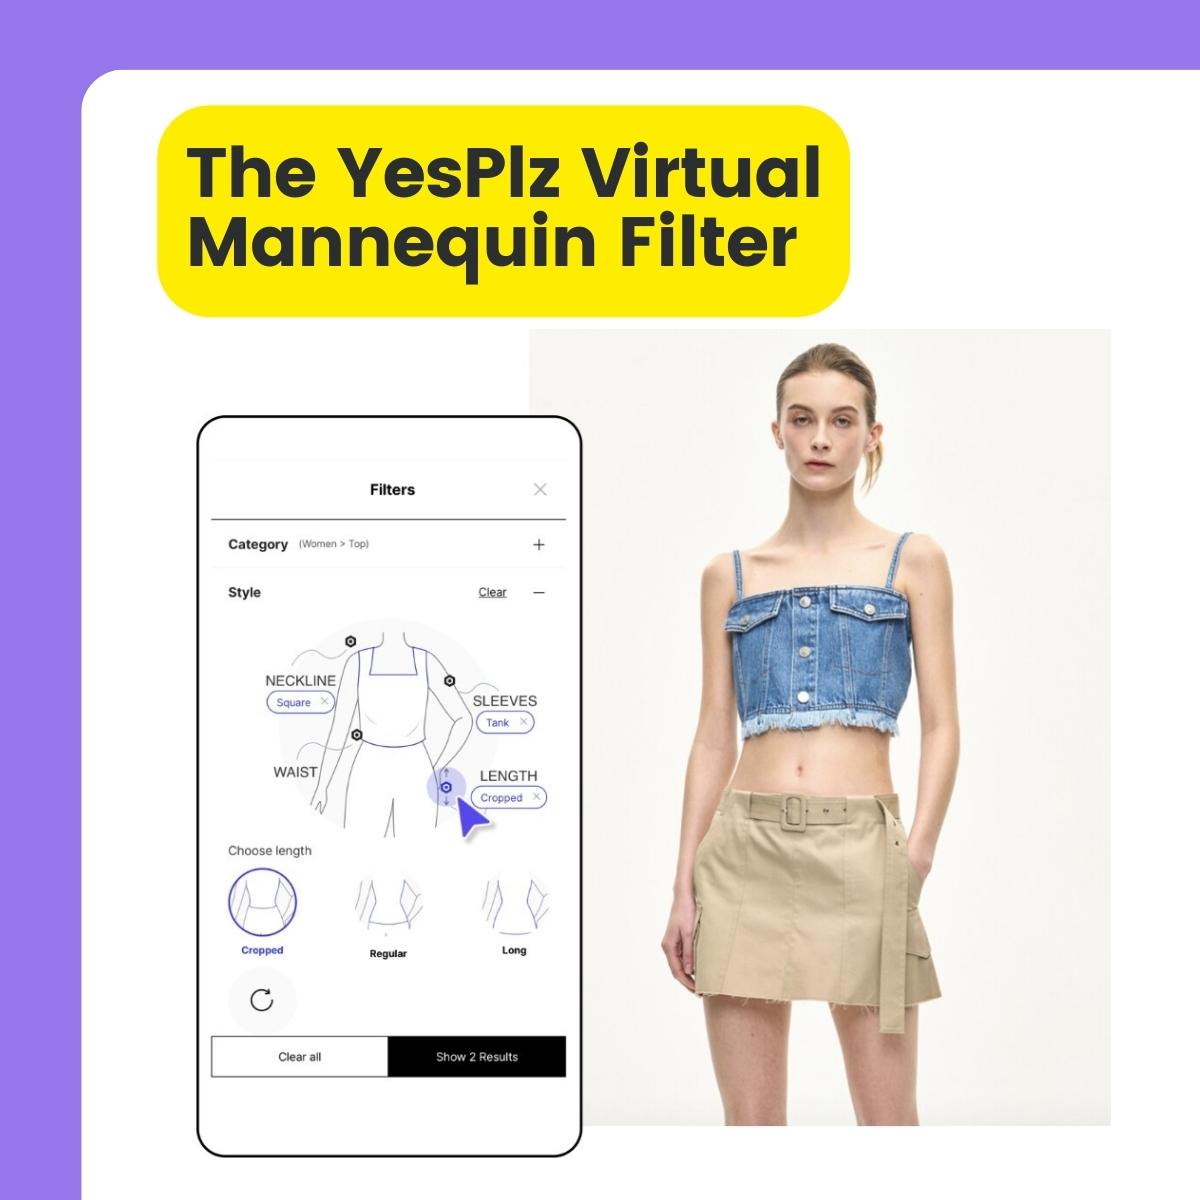 YesPlz virtual mannequin filter as a new fashion AI discovery tool